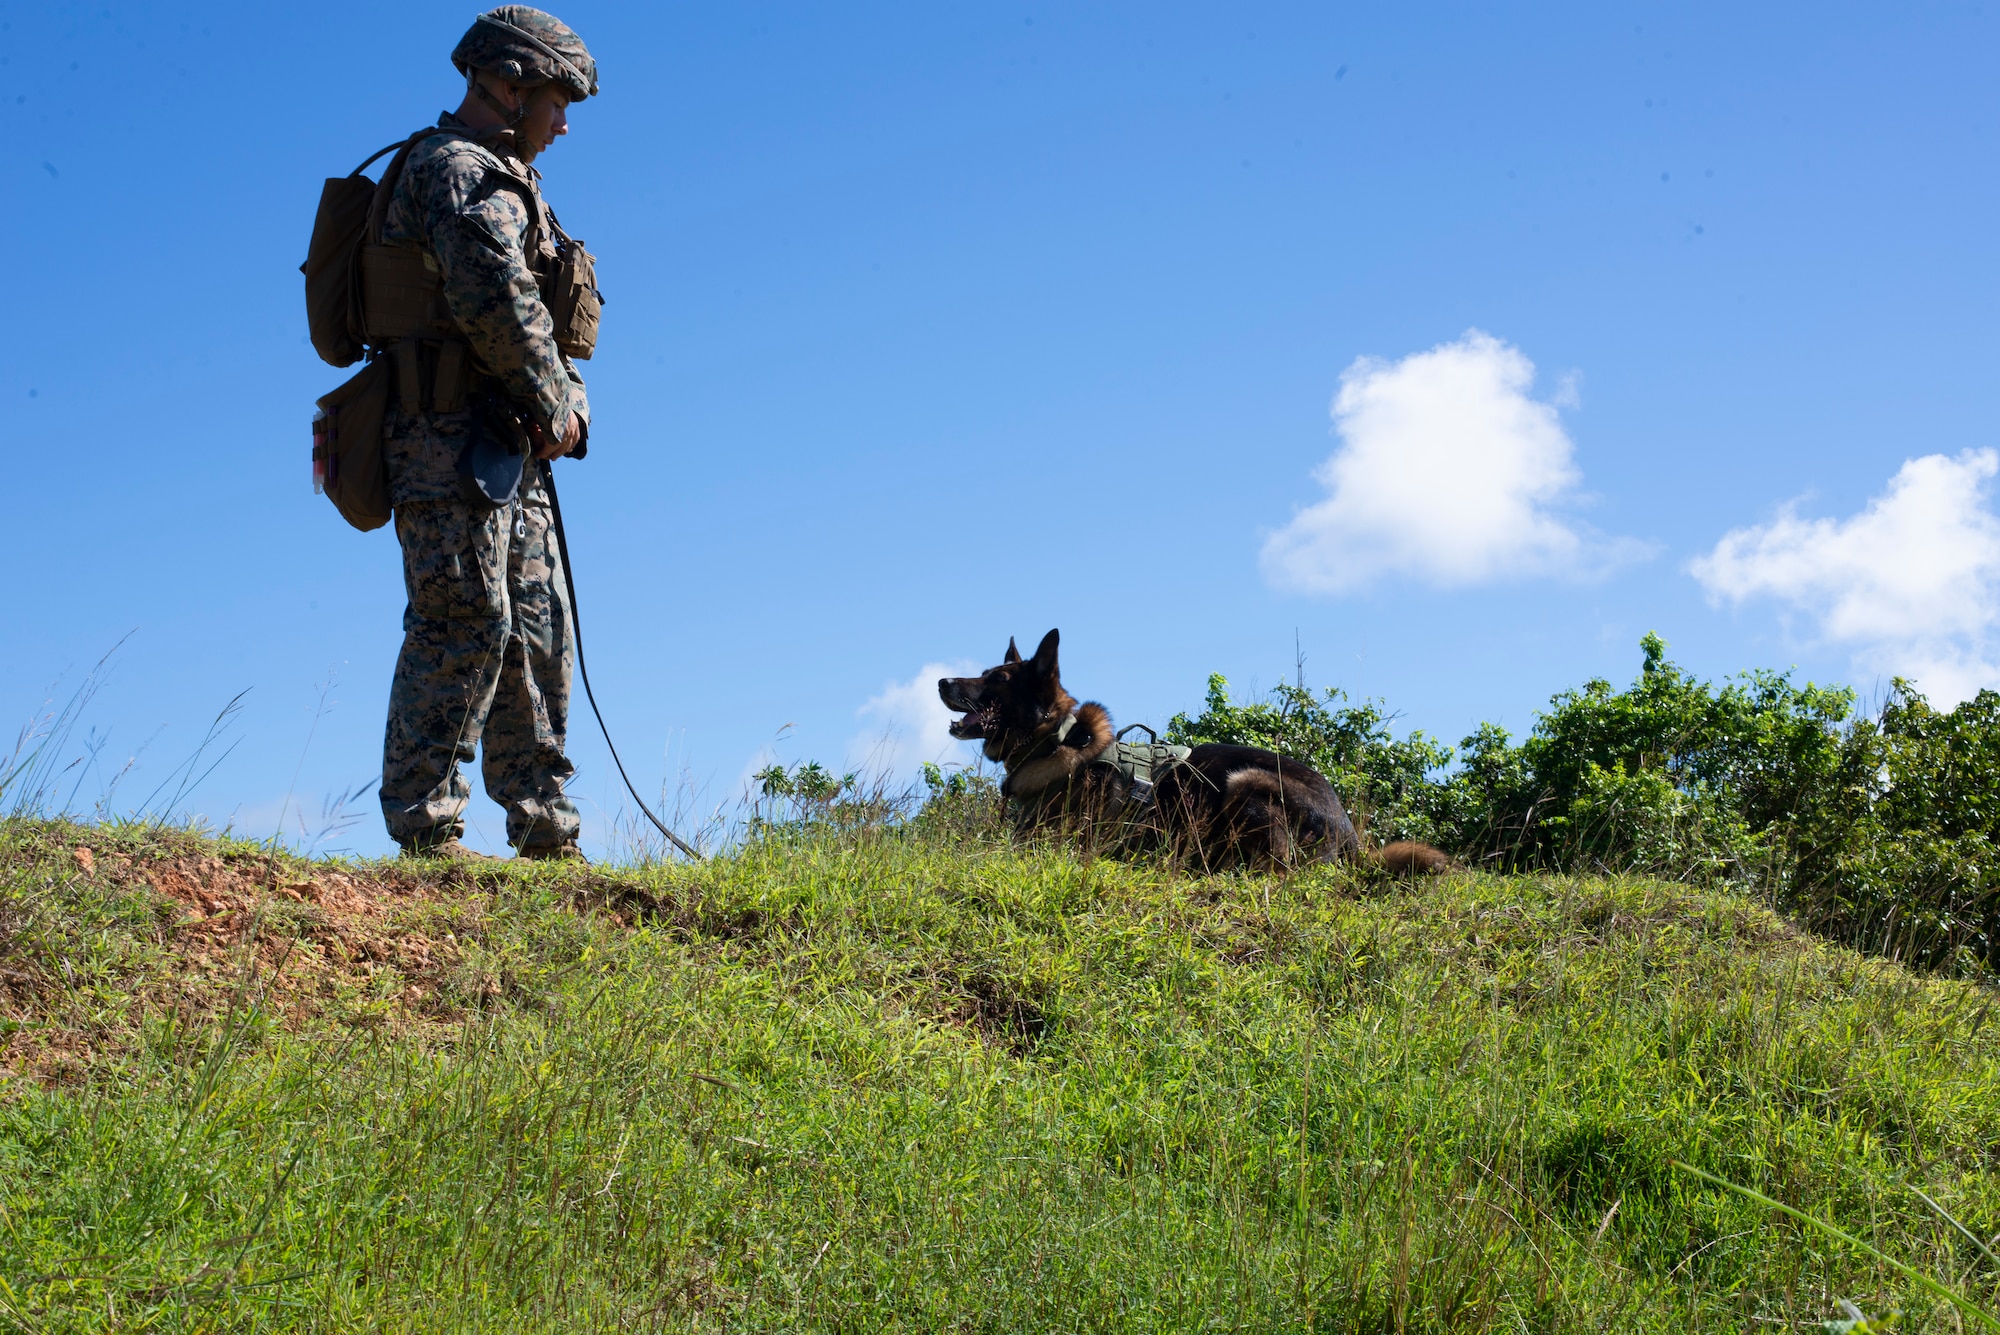 Lance Cpl. Andrew Lutz, 3rd Law Enforcement Battallion, keeps OOhio calm during a pyro exercise to help military working dogs get used to the sounds of combat on Andersen Air Force Base, Guam Nov. 20. Marines and Airmen exchanged MWD techniques to enhance joint mission effectiveness. (U.S. Air Force photo by Staff Sgt. Nicholas Crisp)